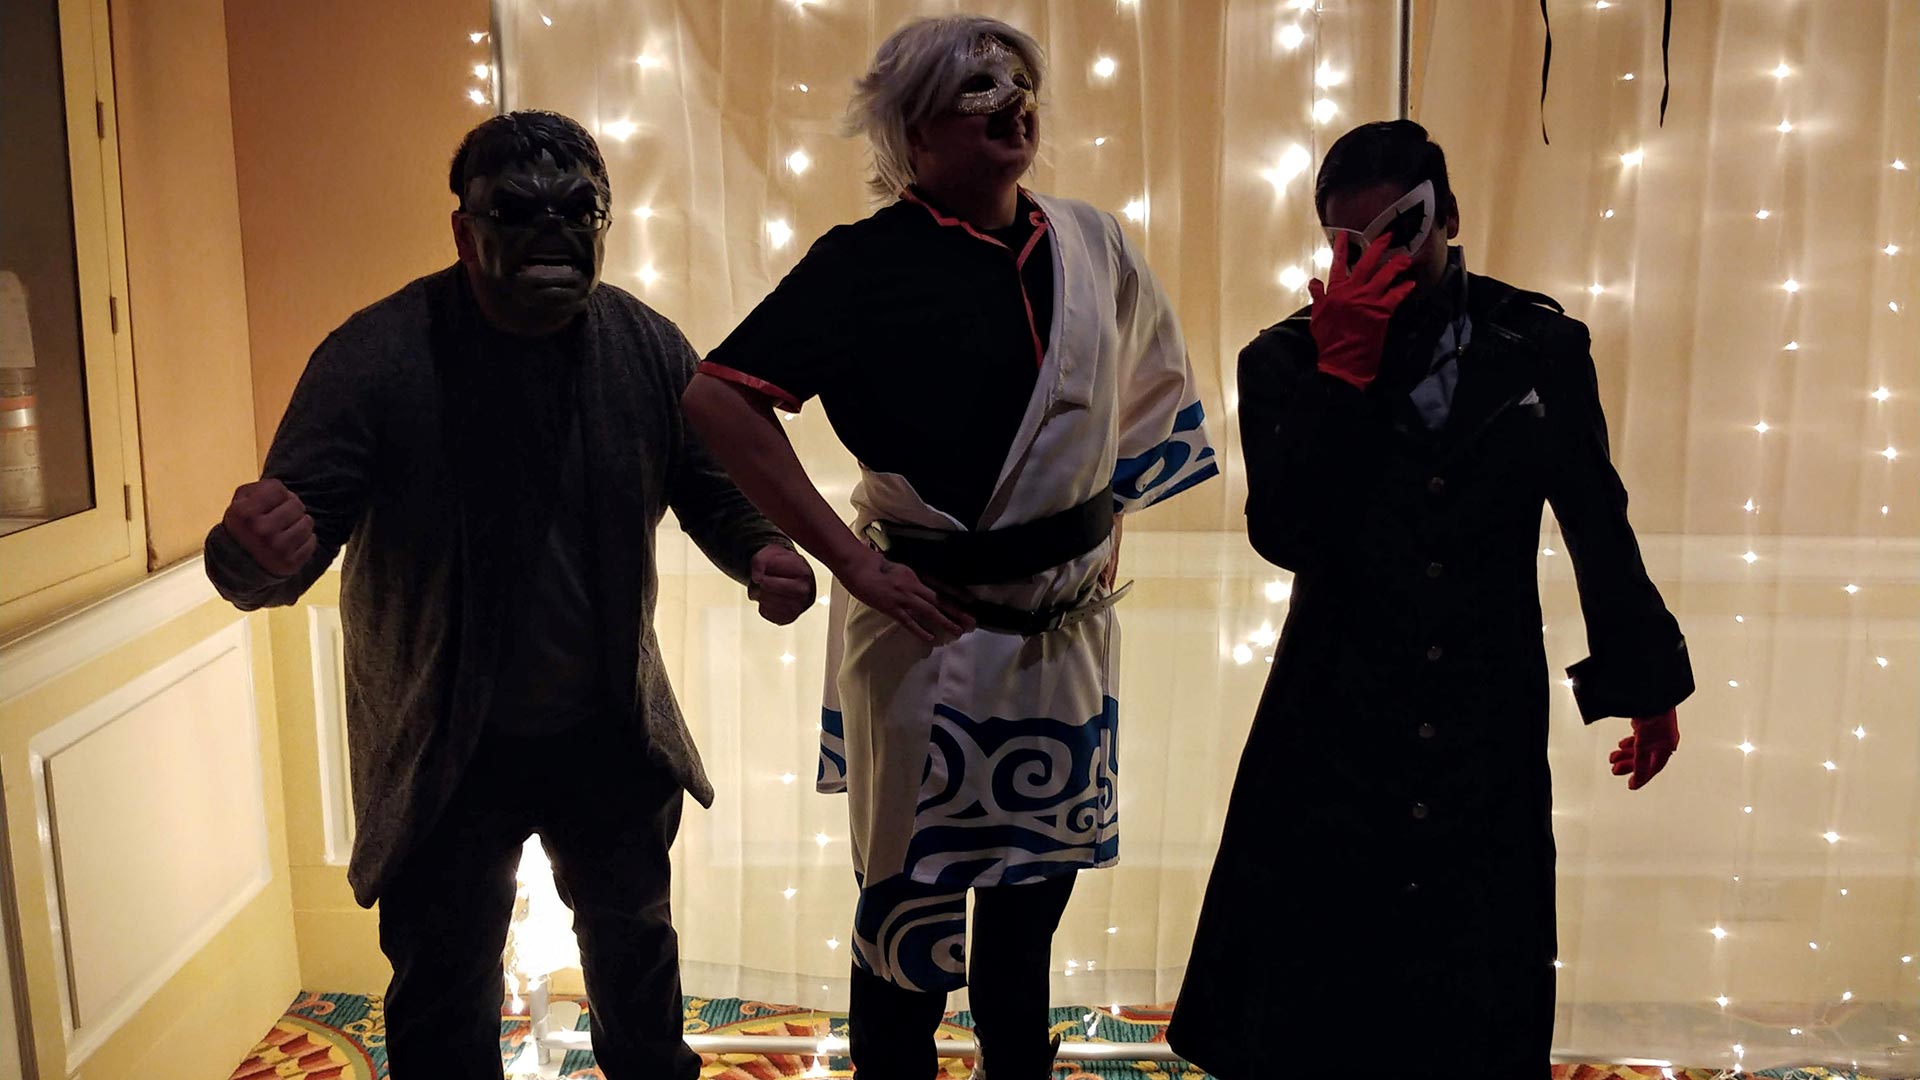 Three young males dressed as Smart Hulk from Avengers: Endgame, Gintoki from Gintama and Joker from Persona 5.